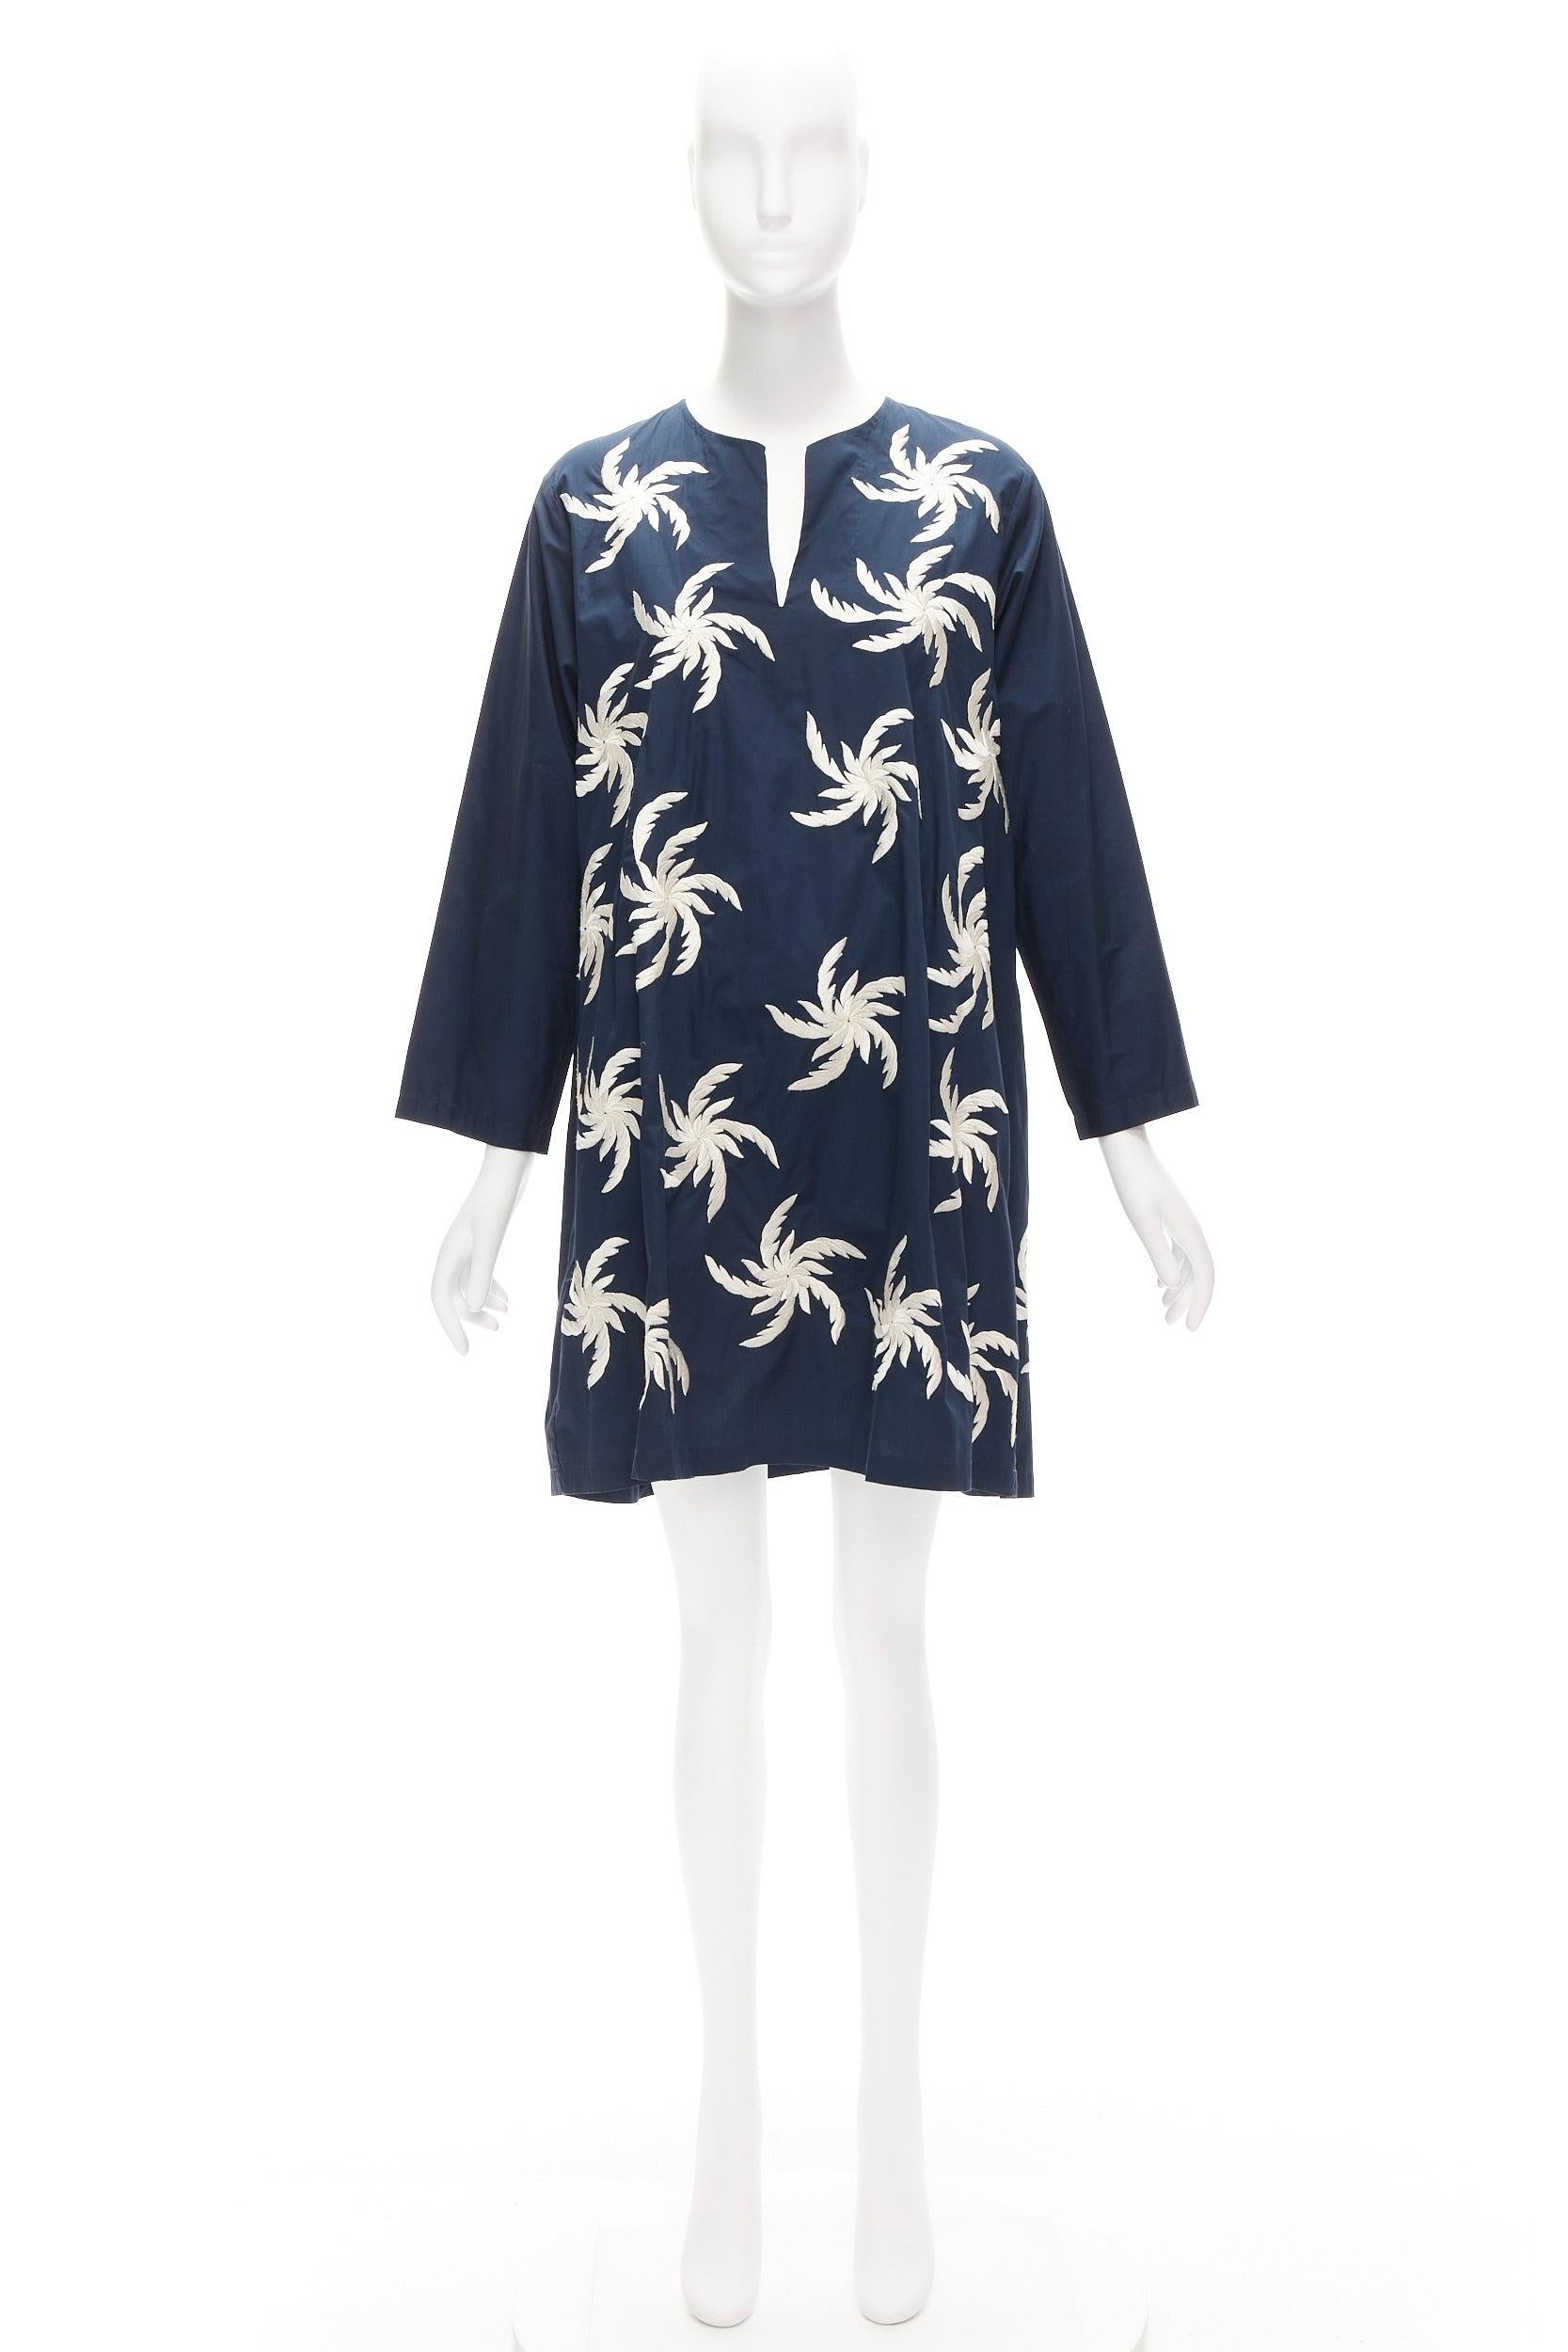 DRIES VAN NOTEN navy white 100% cotton floral embroidery boxy dress XS For Sale 4